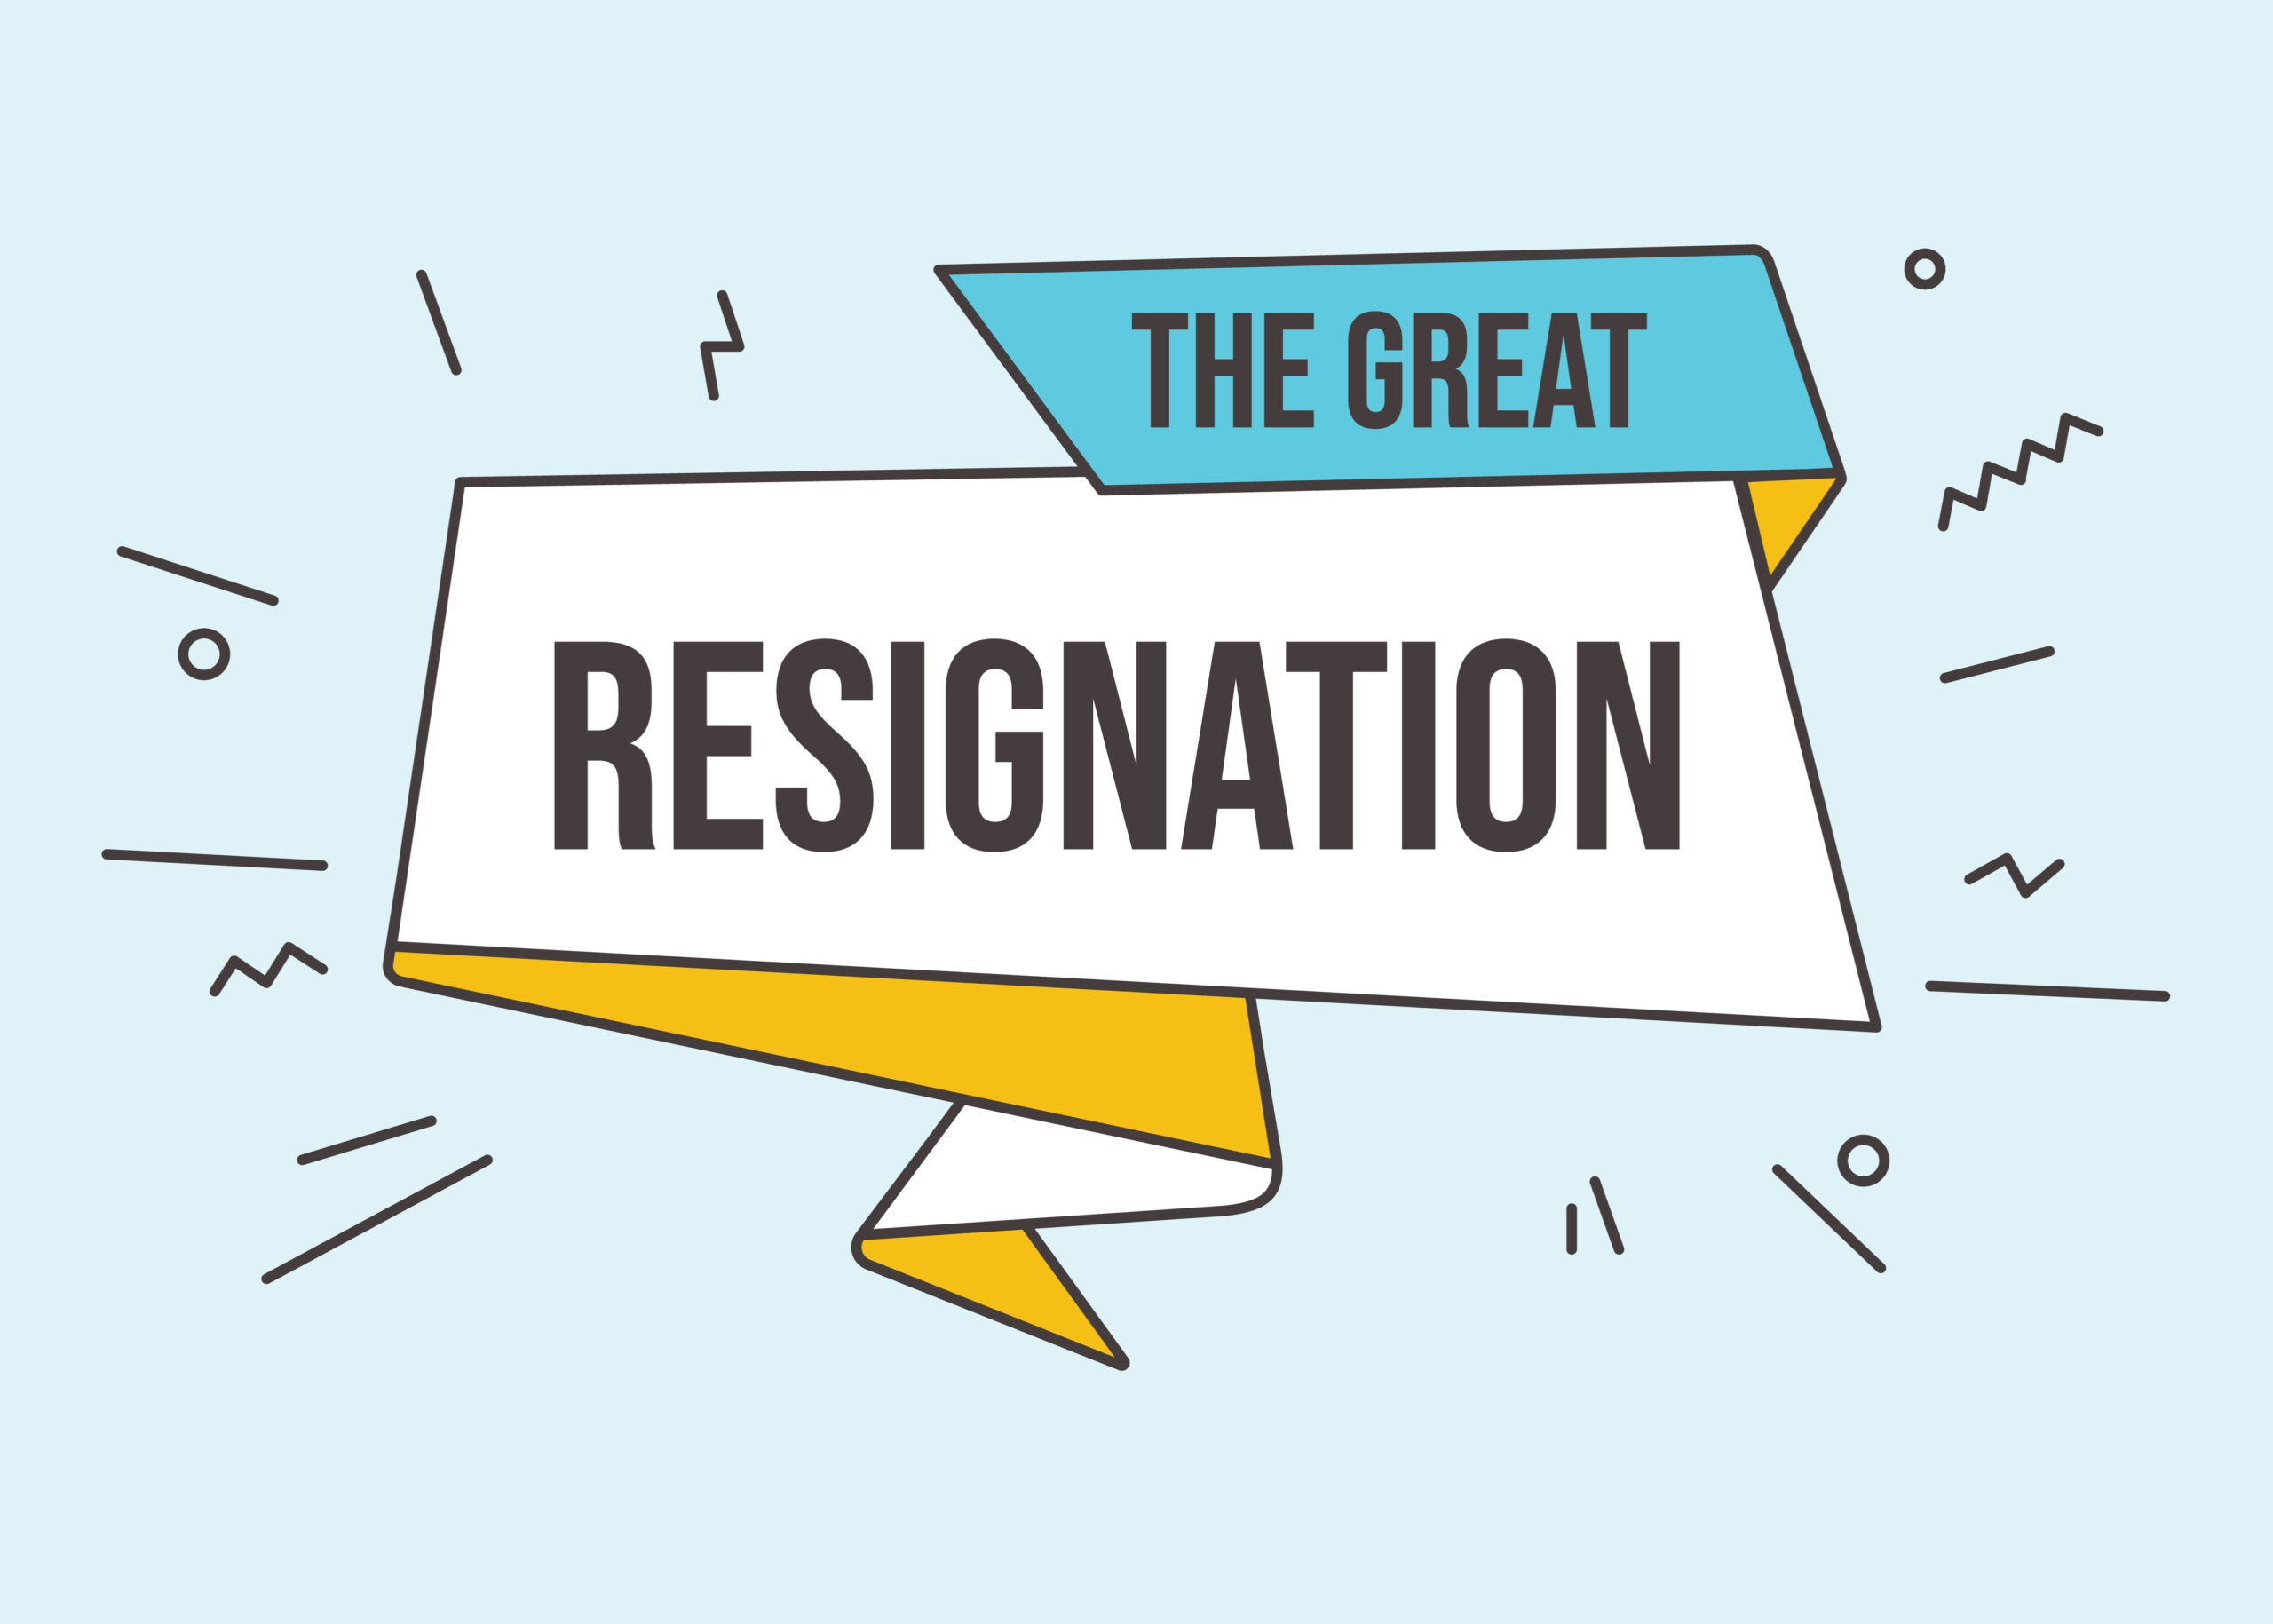 The “Great Resignation” is real. Employees vow they’re “not going to take it anymore” and employers scramble to retain them. Read more.